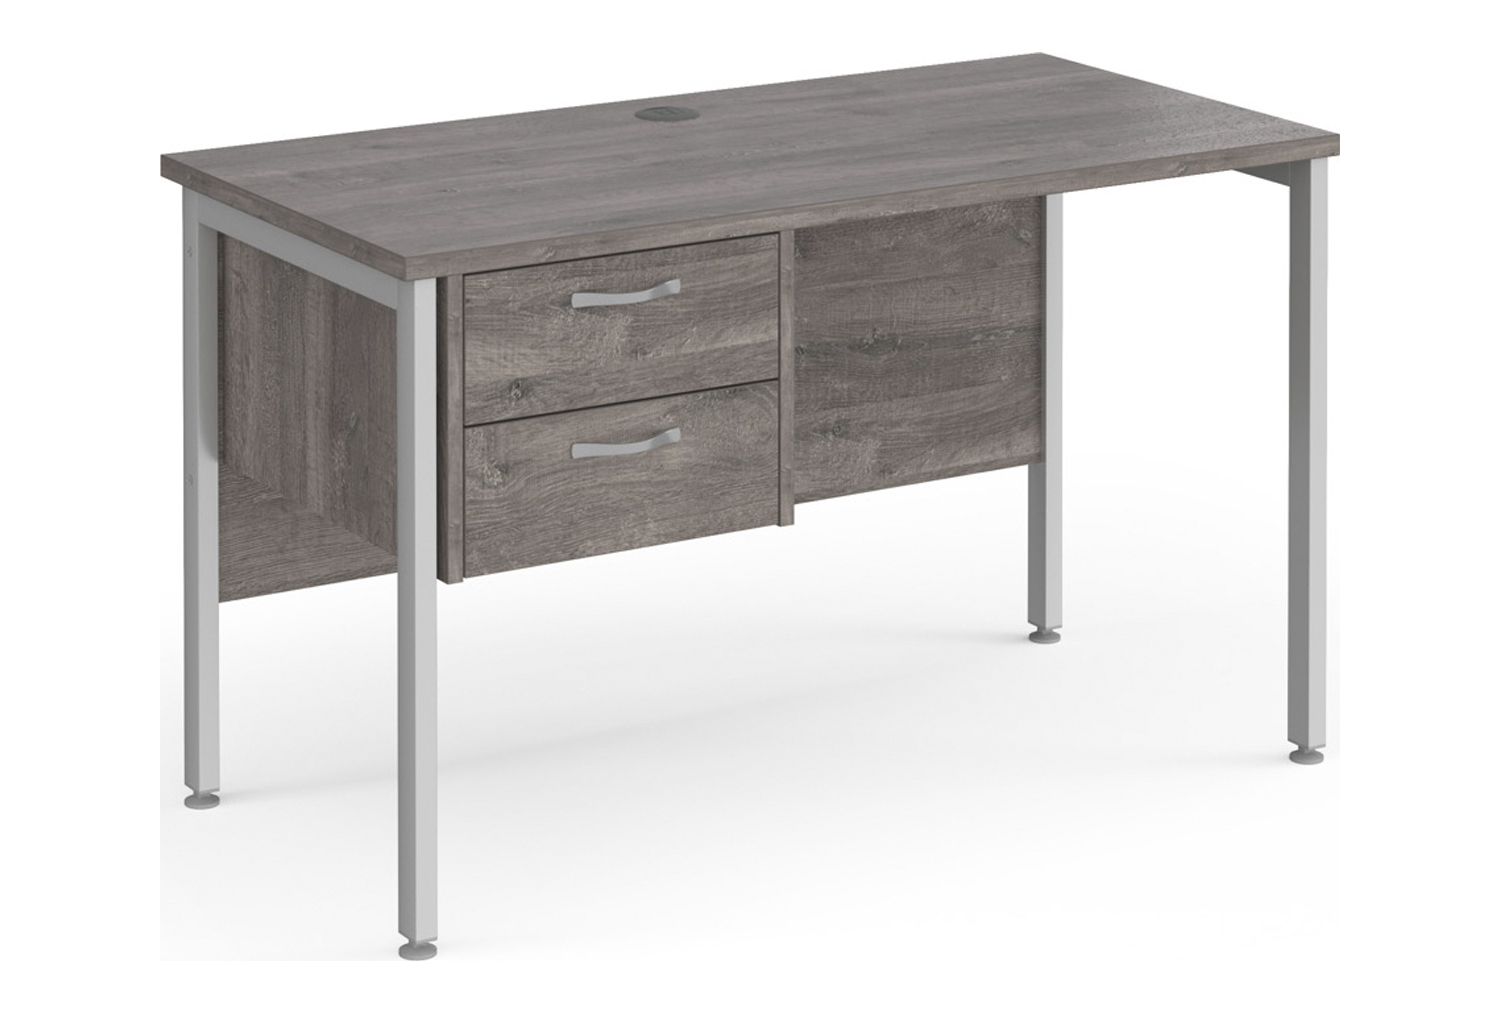 Value Line Deluxe H-Leg Narrow Rectangular Office Desk 2 Drawers (Silver Legs), 120w60dx73h (cm), Grey Oak, Express Delivery